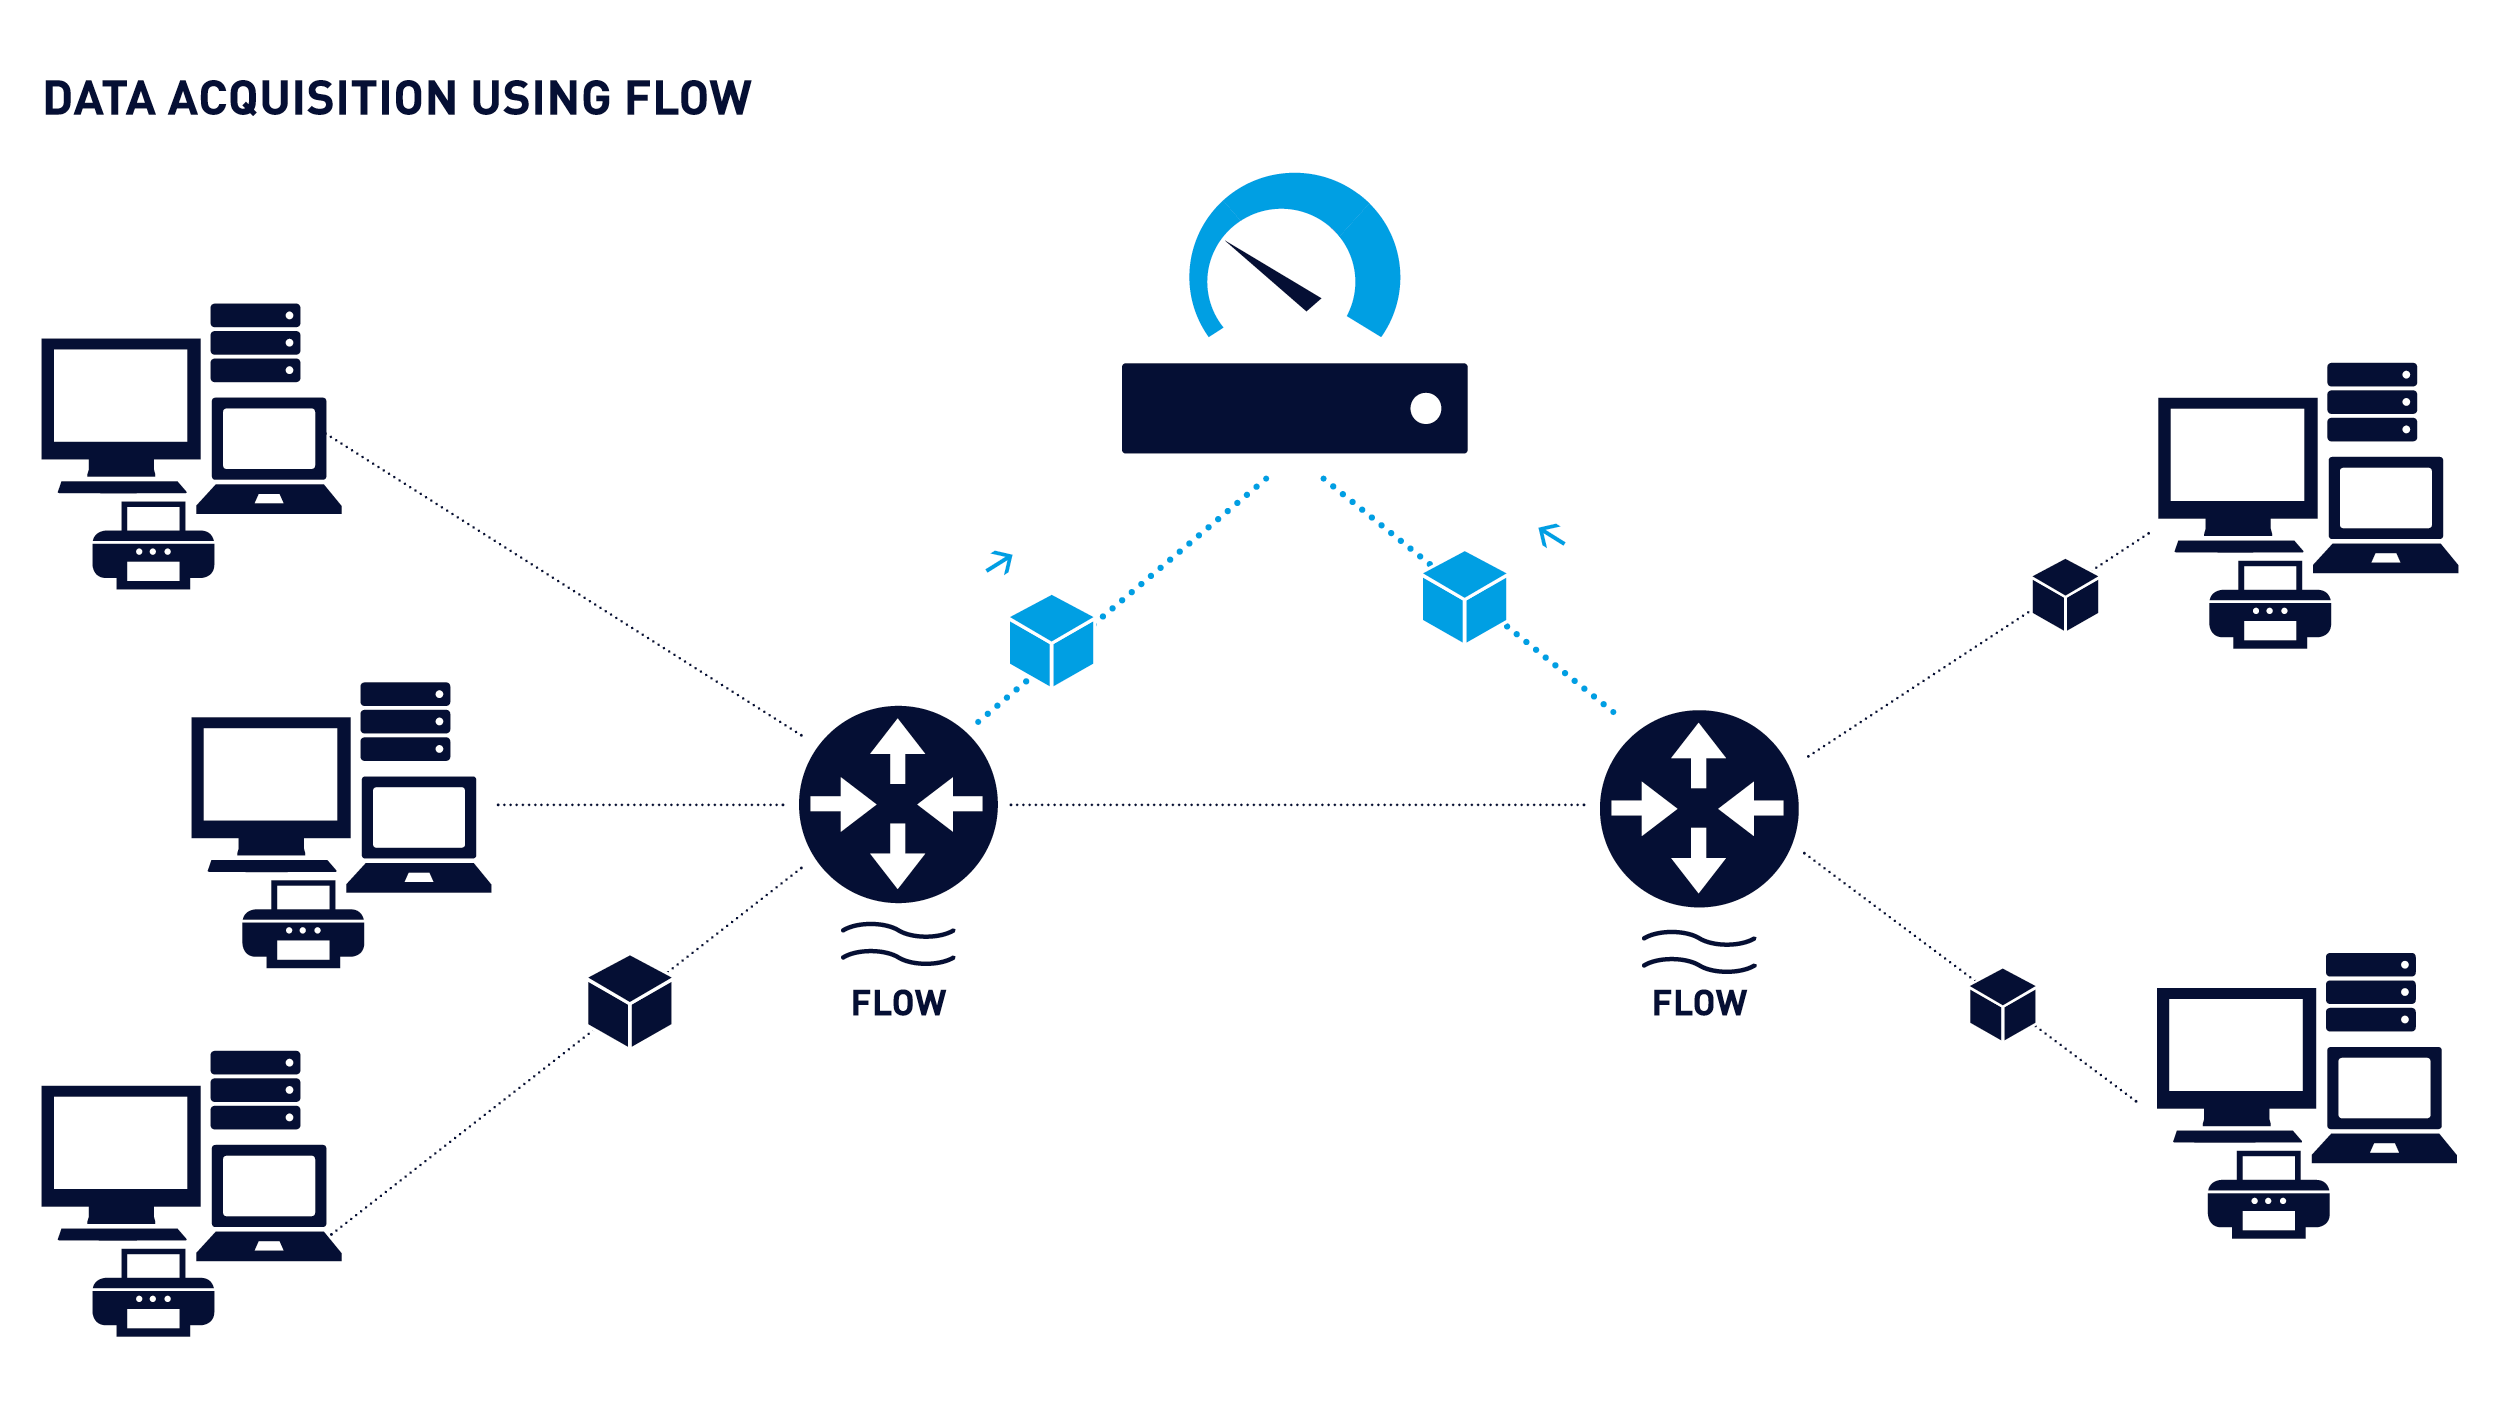 Flow monitoring: flow of data packets